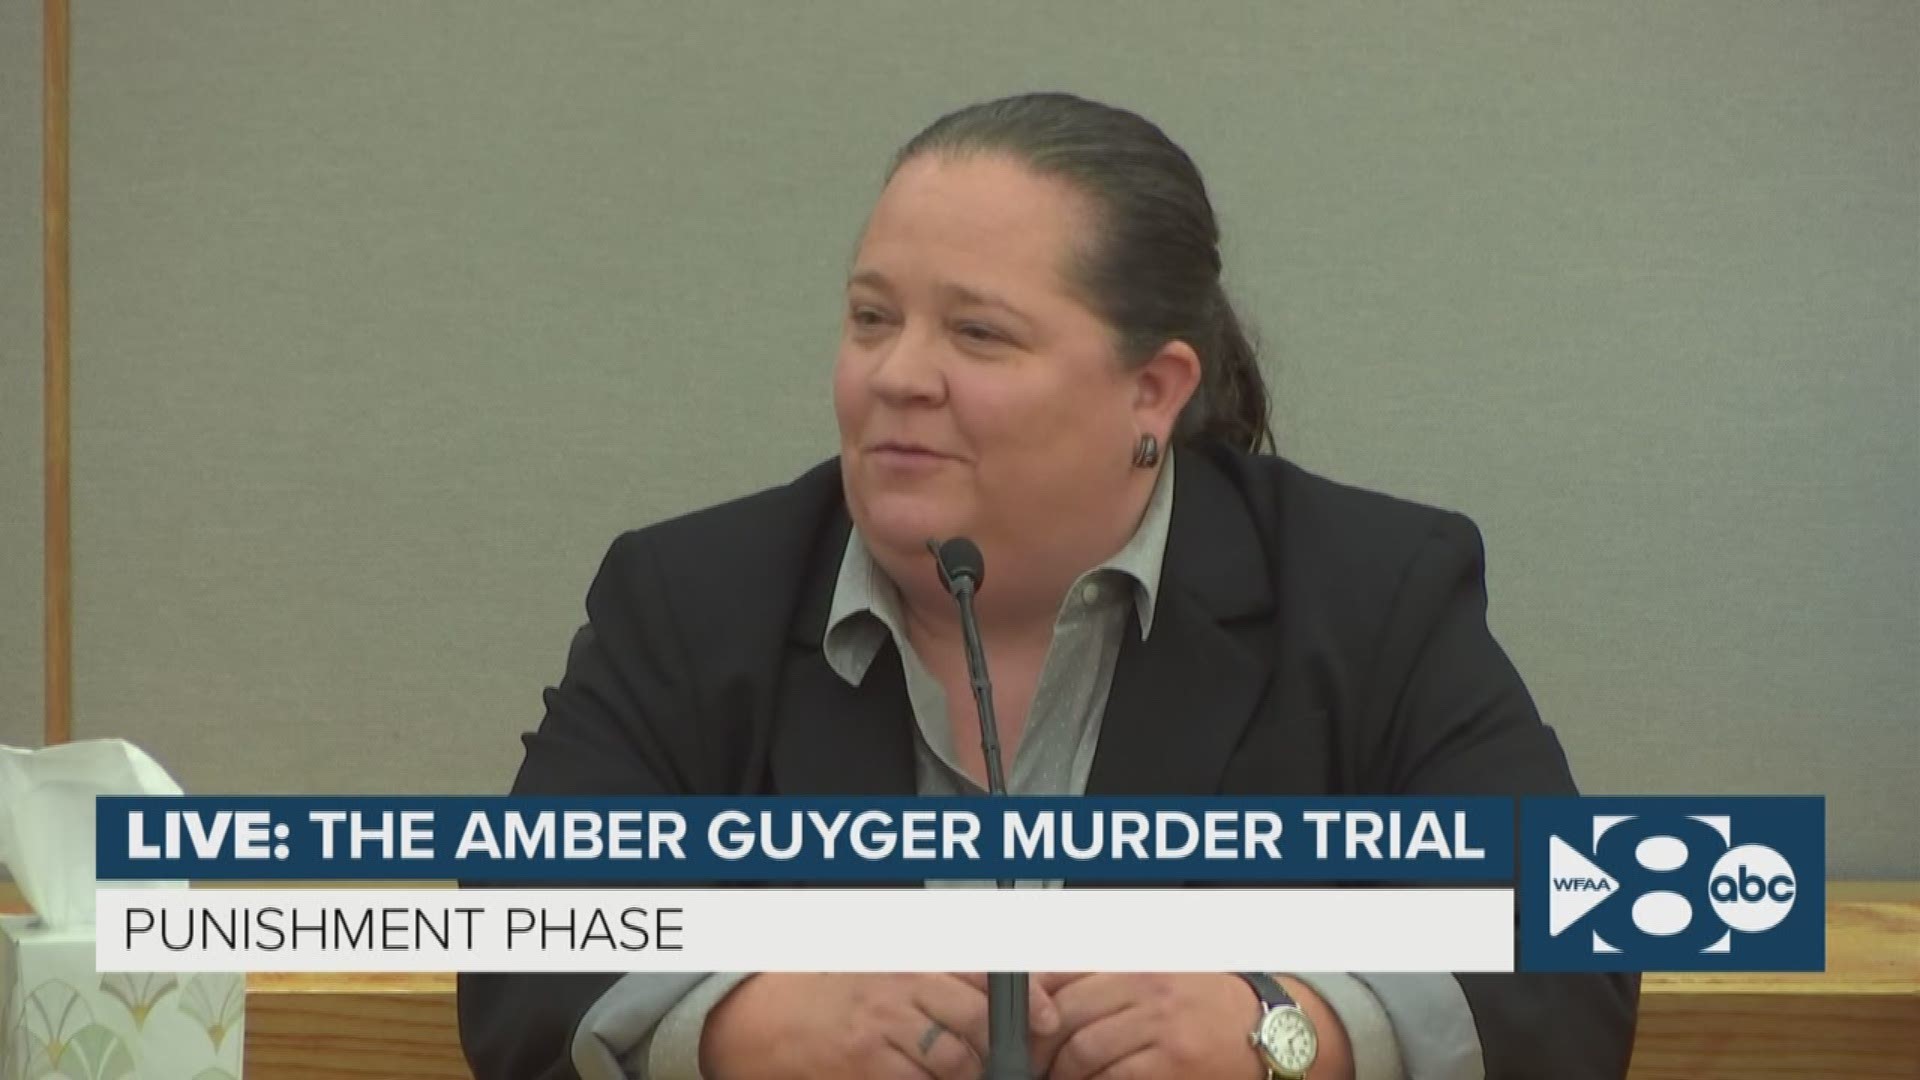 Rhonda Richeson, a detective with the Dallas Police Department, testified Wednesday about her experience training Amber Guyger.